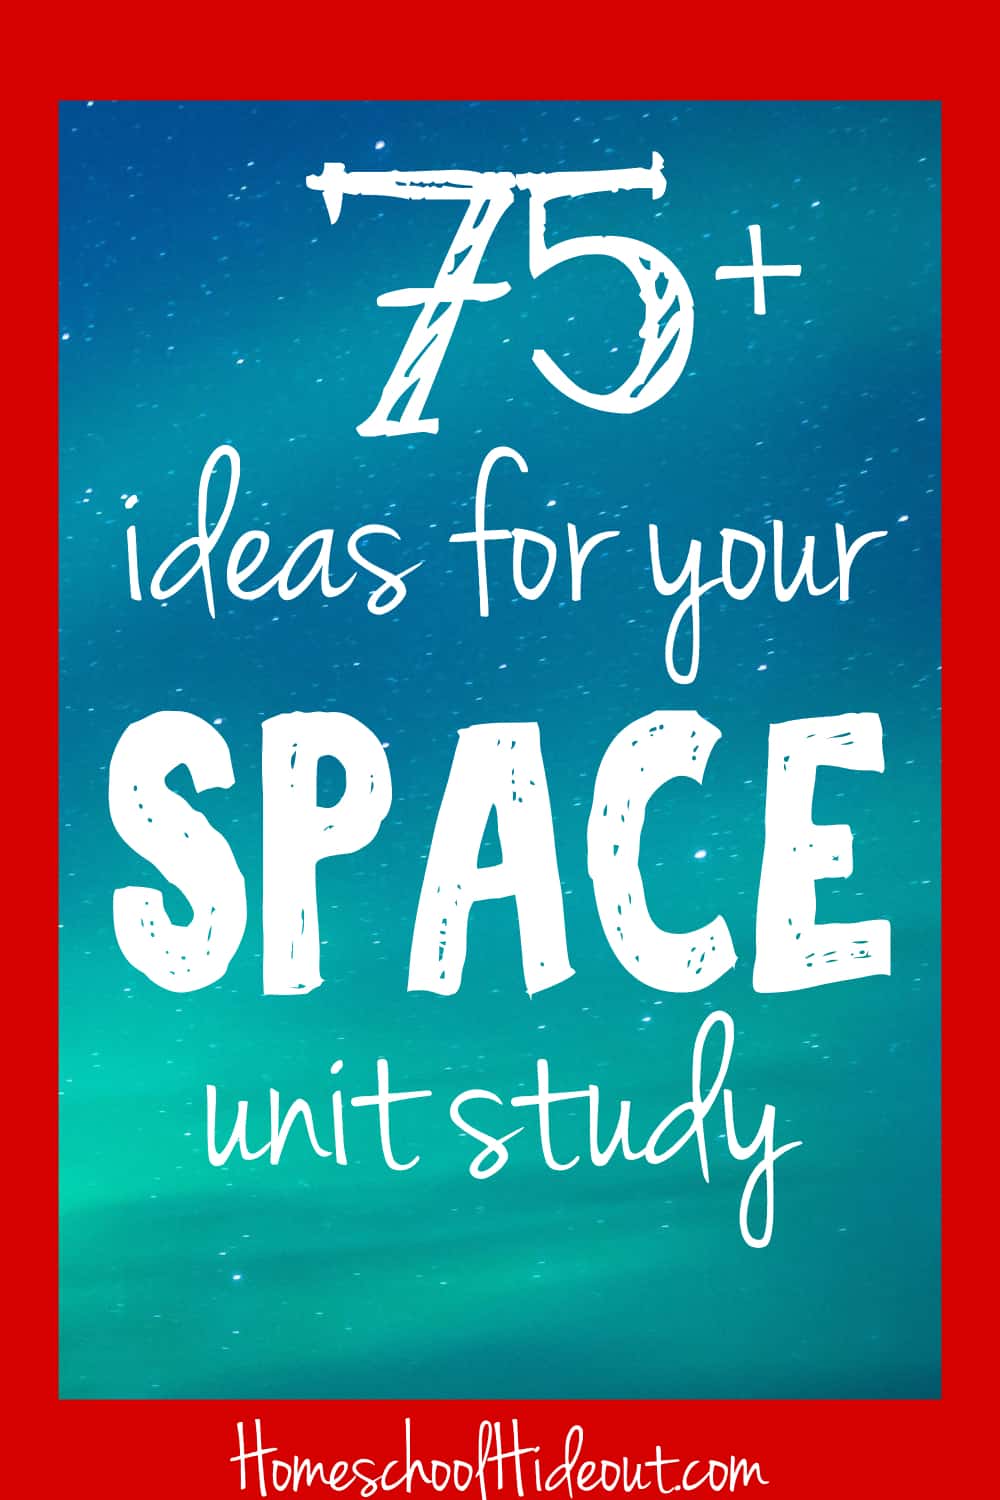 Looking for ideas to make your space unit study more fun? We've got ya covered! With 75 ideas from slime to sticker books, there's something for everyone. #science #space #tgatb #homeschool #homeschoolers #homeschooling #educational #unitstudy